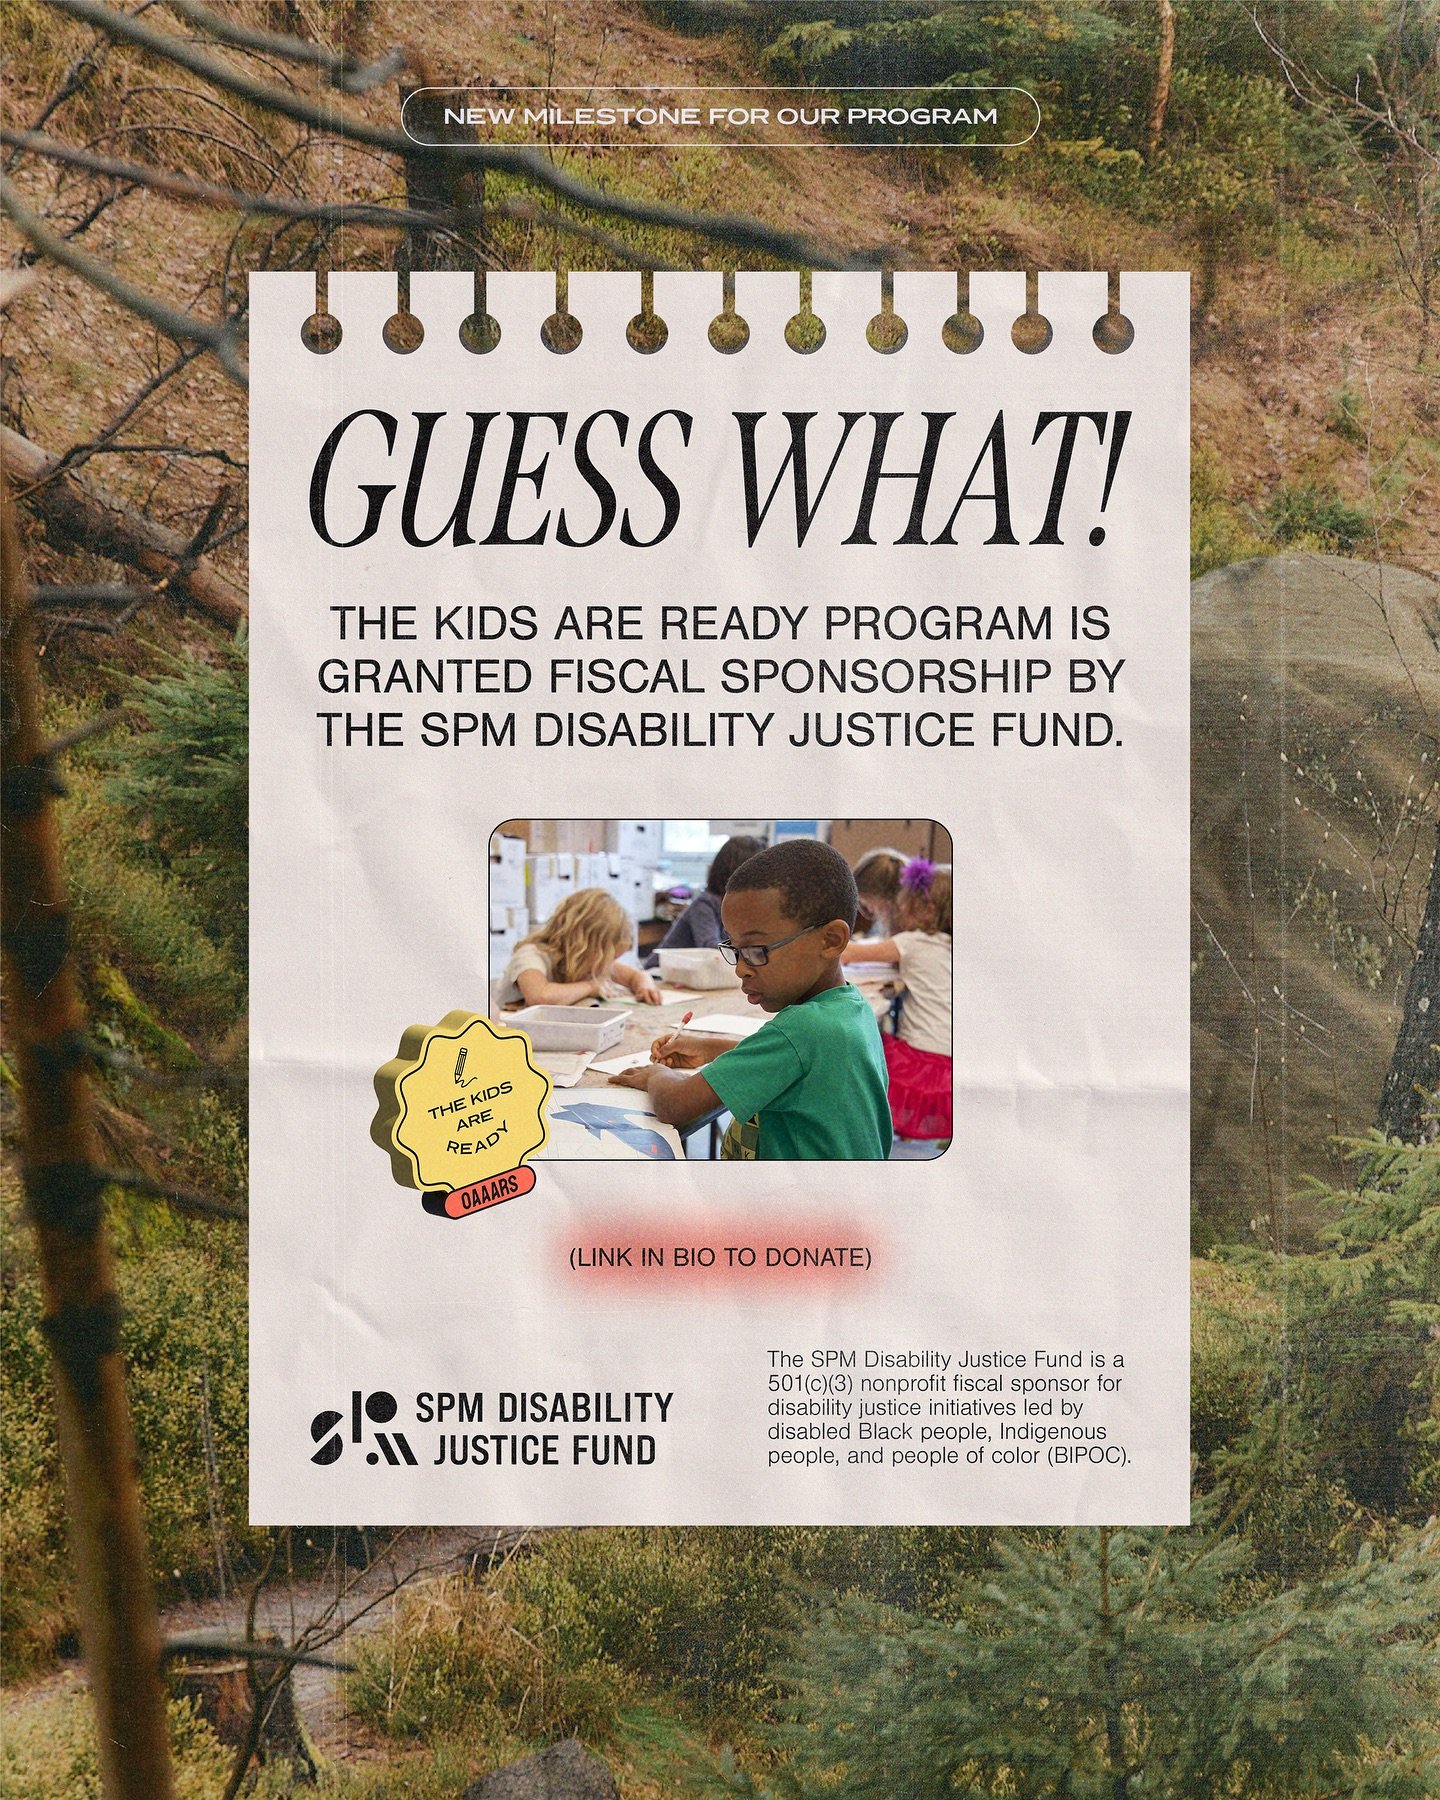 📣📣📣 Hello OAAARS Community! We are excited to announce that OAAARS&rsquo; The Kids Are Ready Program has been granted fiscal sponsorship by the SPM Disability Justice Fund (@spmdisabilityjusticefund). The SPM Disability Justice Fund is a 501(c)(3)